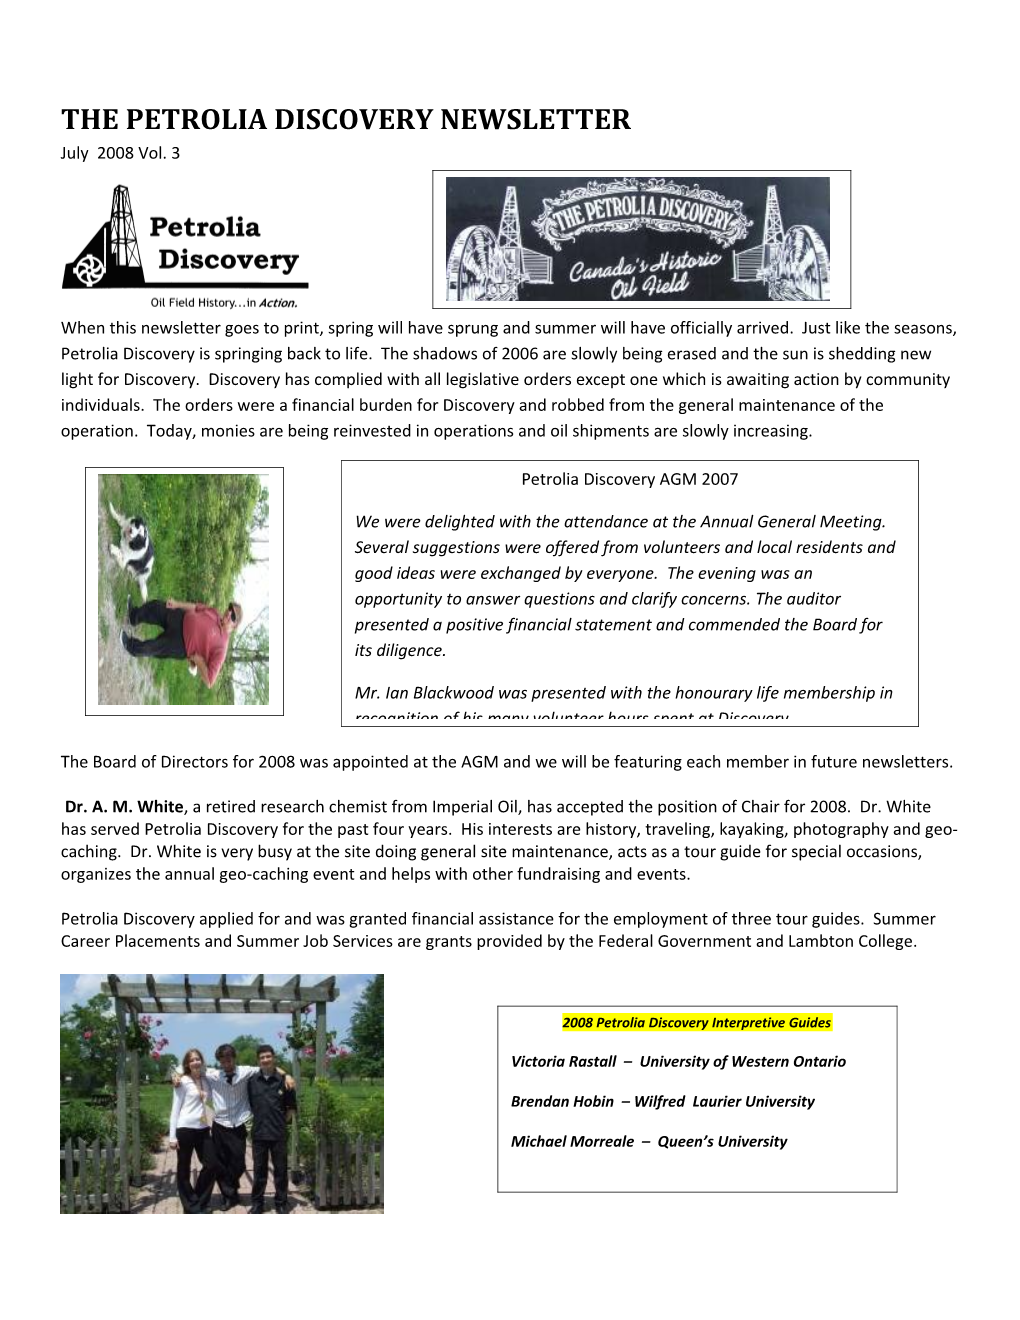 The Petrolia Discovery Newsletter